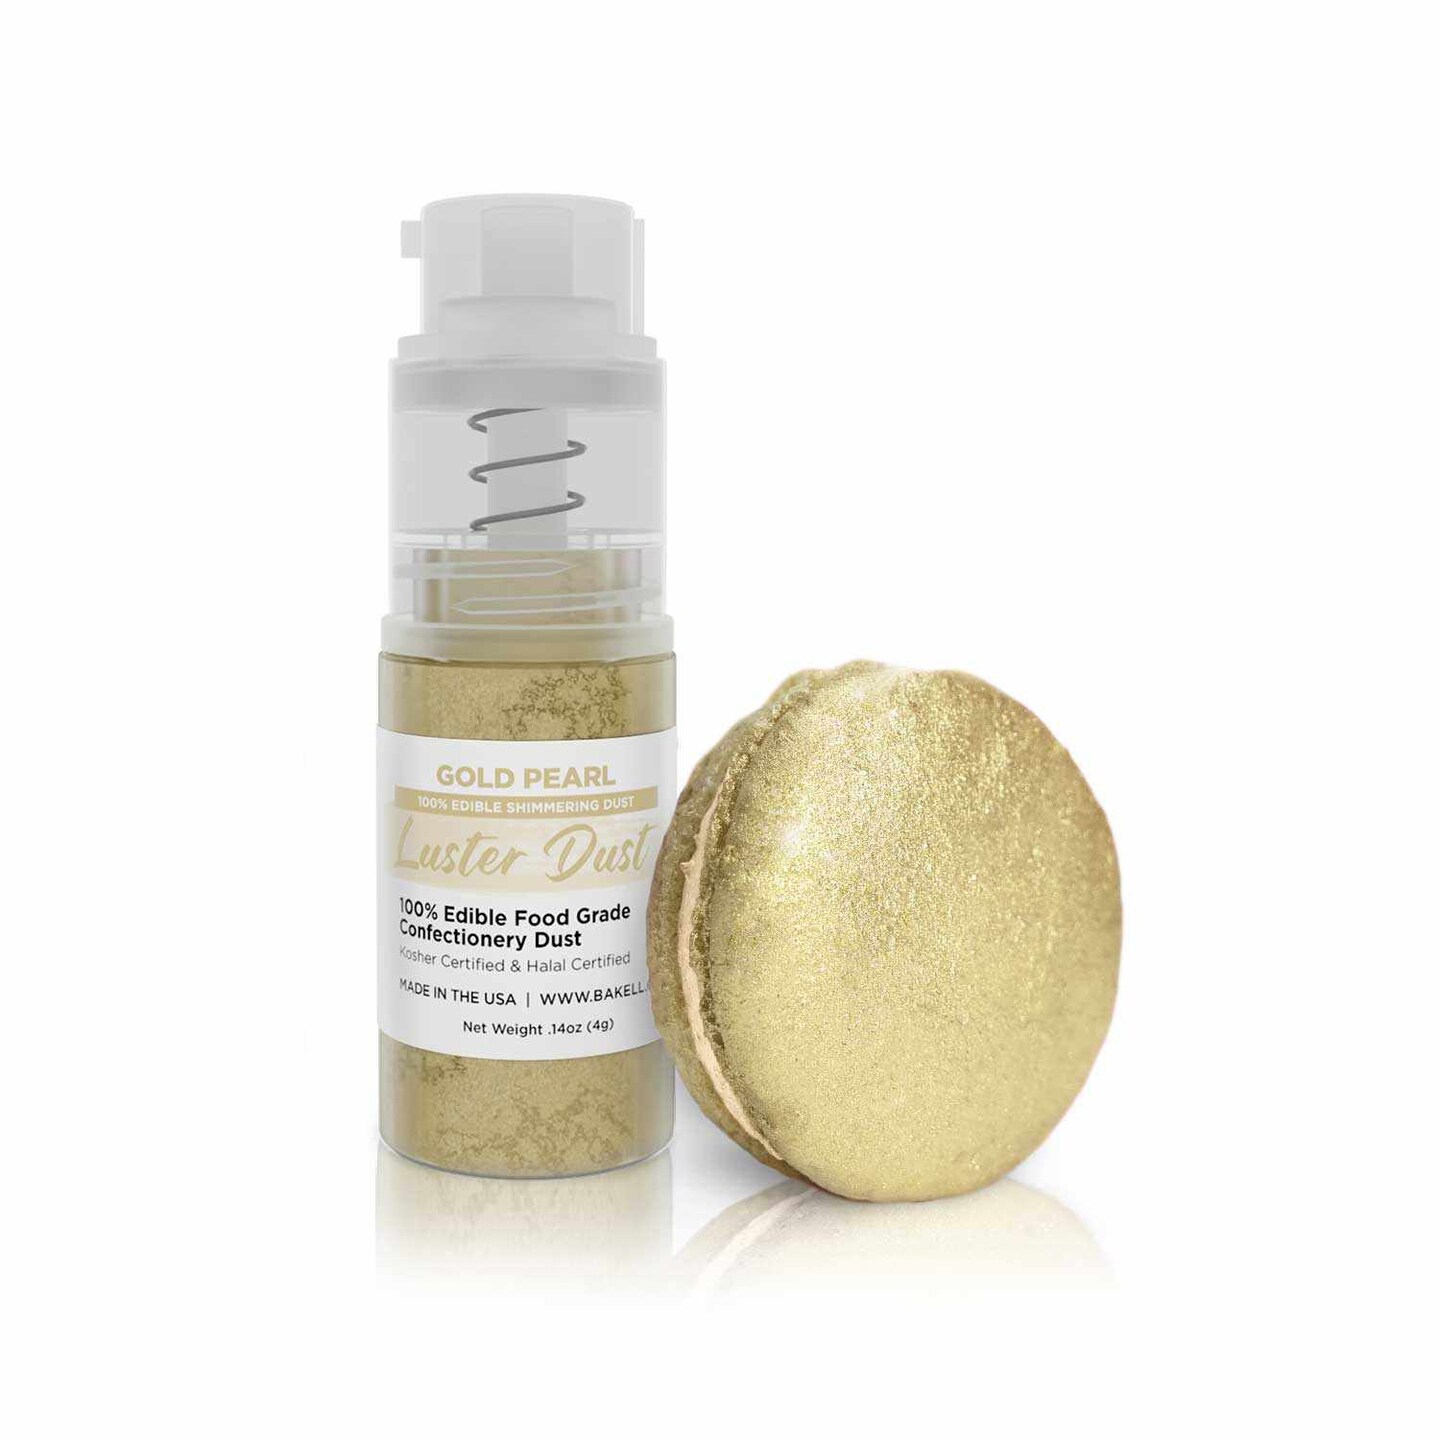 Gold Pearl Luster Dust Spray, Luster Dust Edible Glitter Spray Dust for  Cakes, Cookies, Desserts, Paint. FDA Compliant (4 Gram Pump)